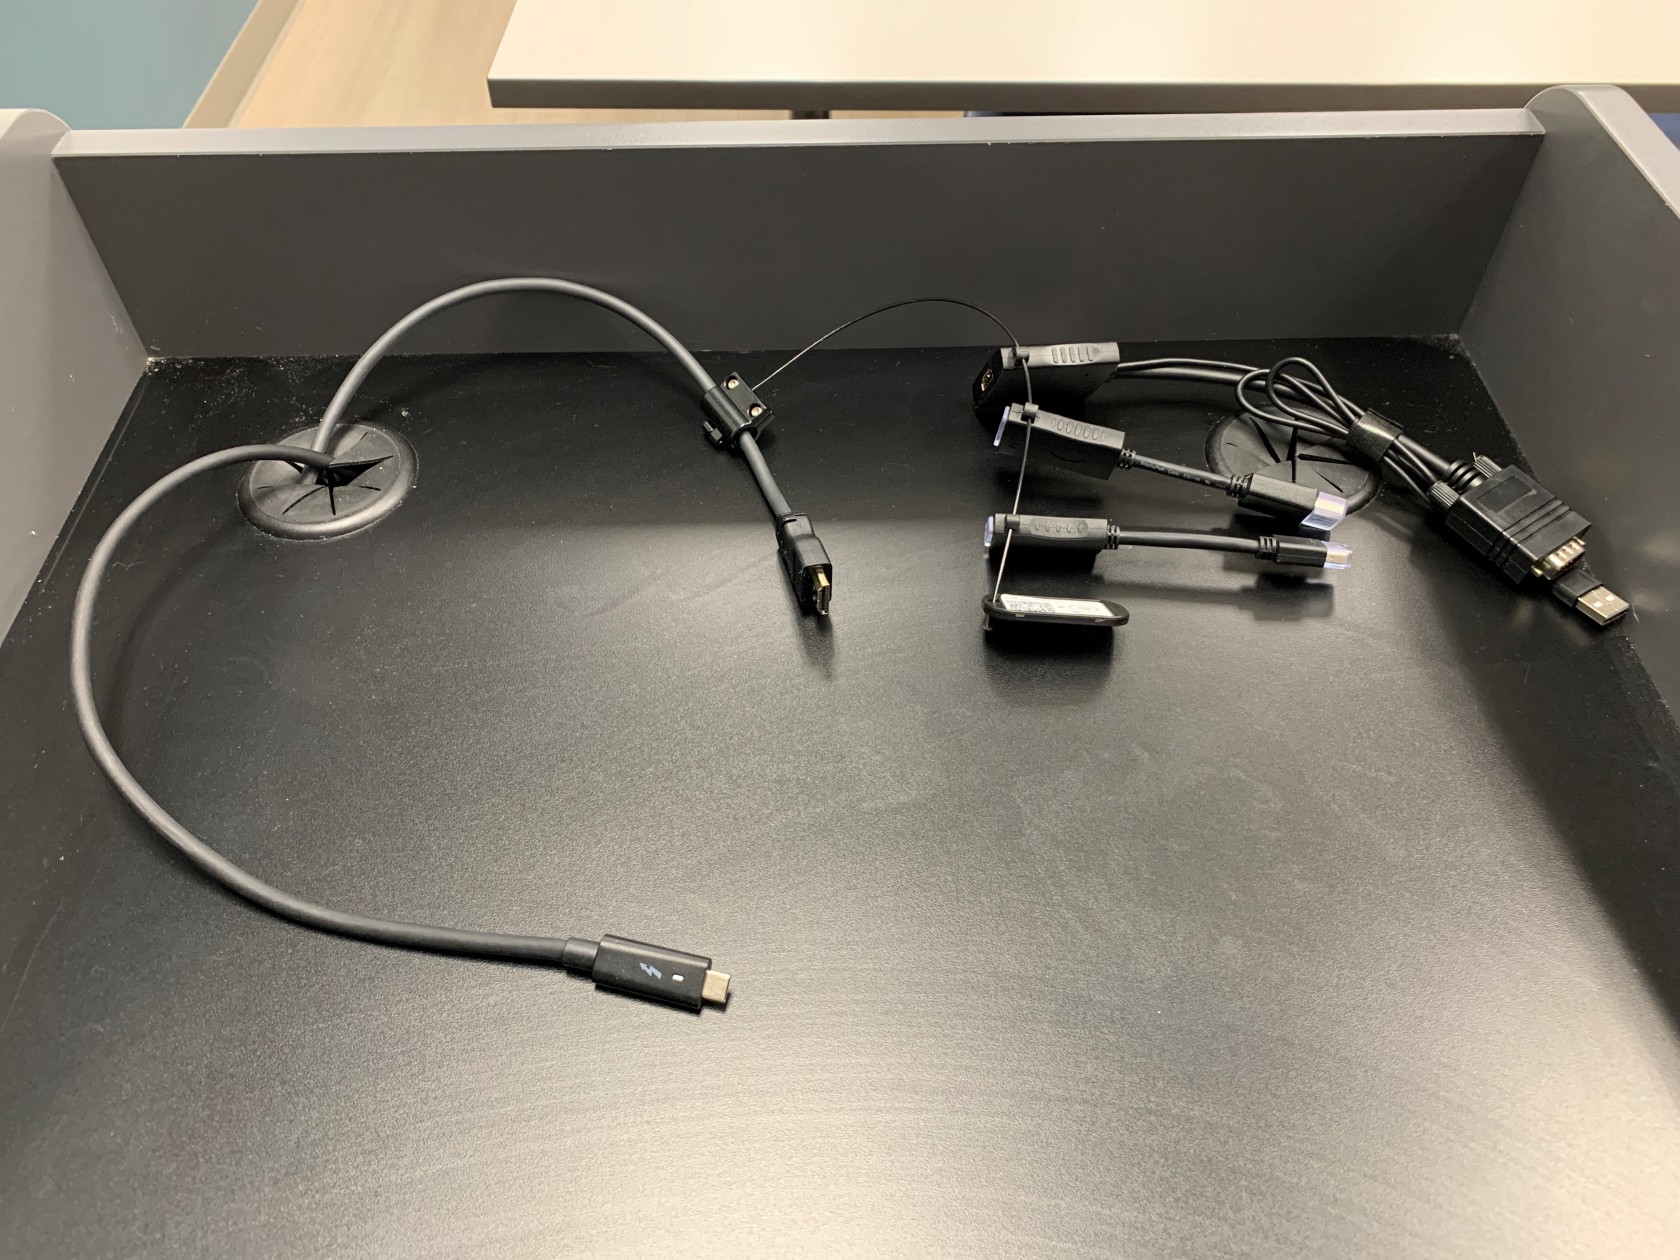 cables on desk usb-c and hdmi.jpg